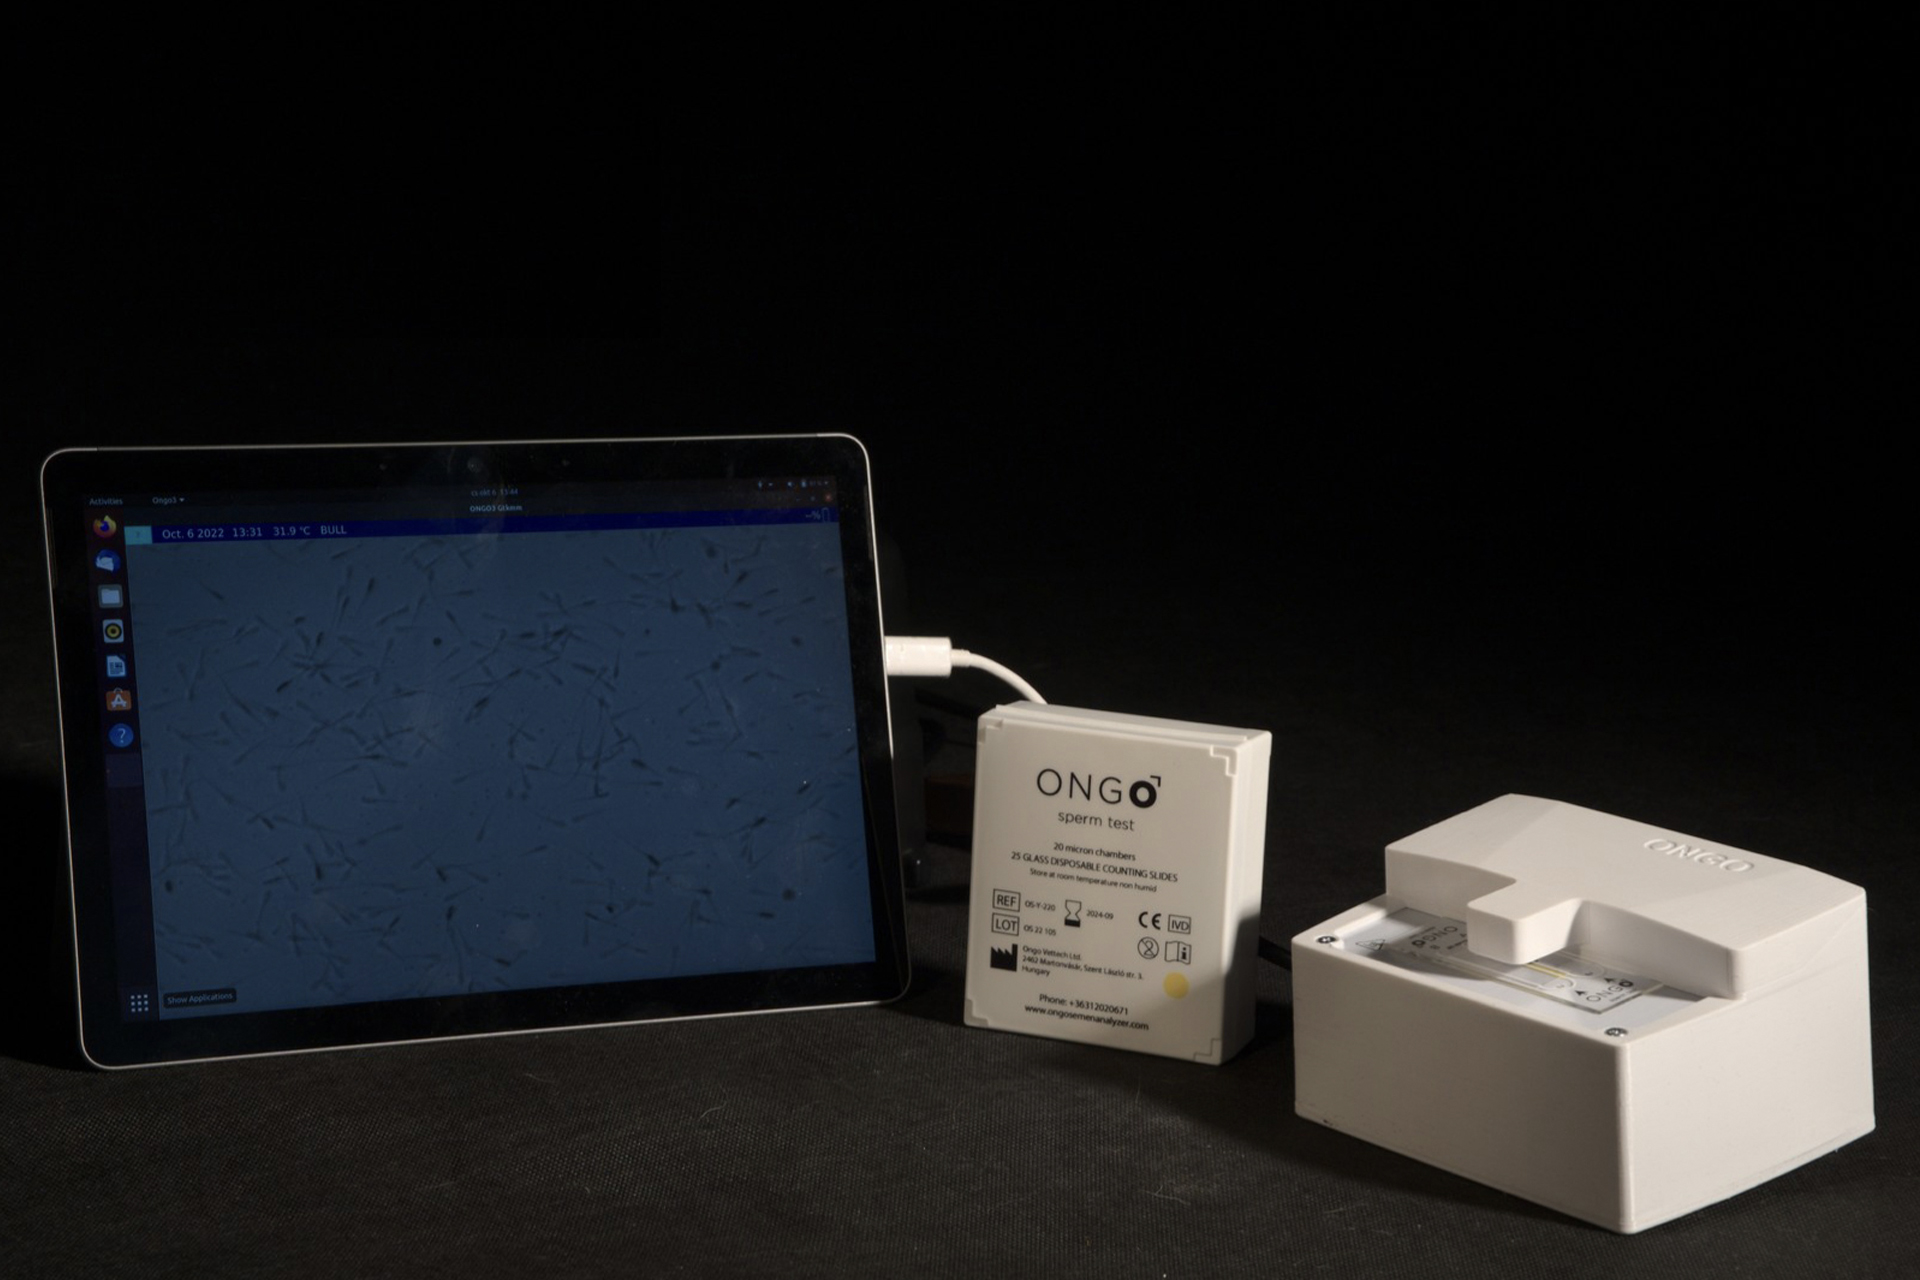 ONGO VISION mobile sperm analyser connected to a Tablet from www.ongovettech.com